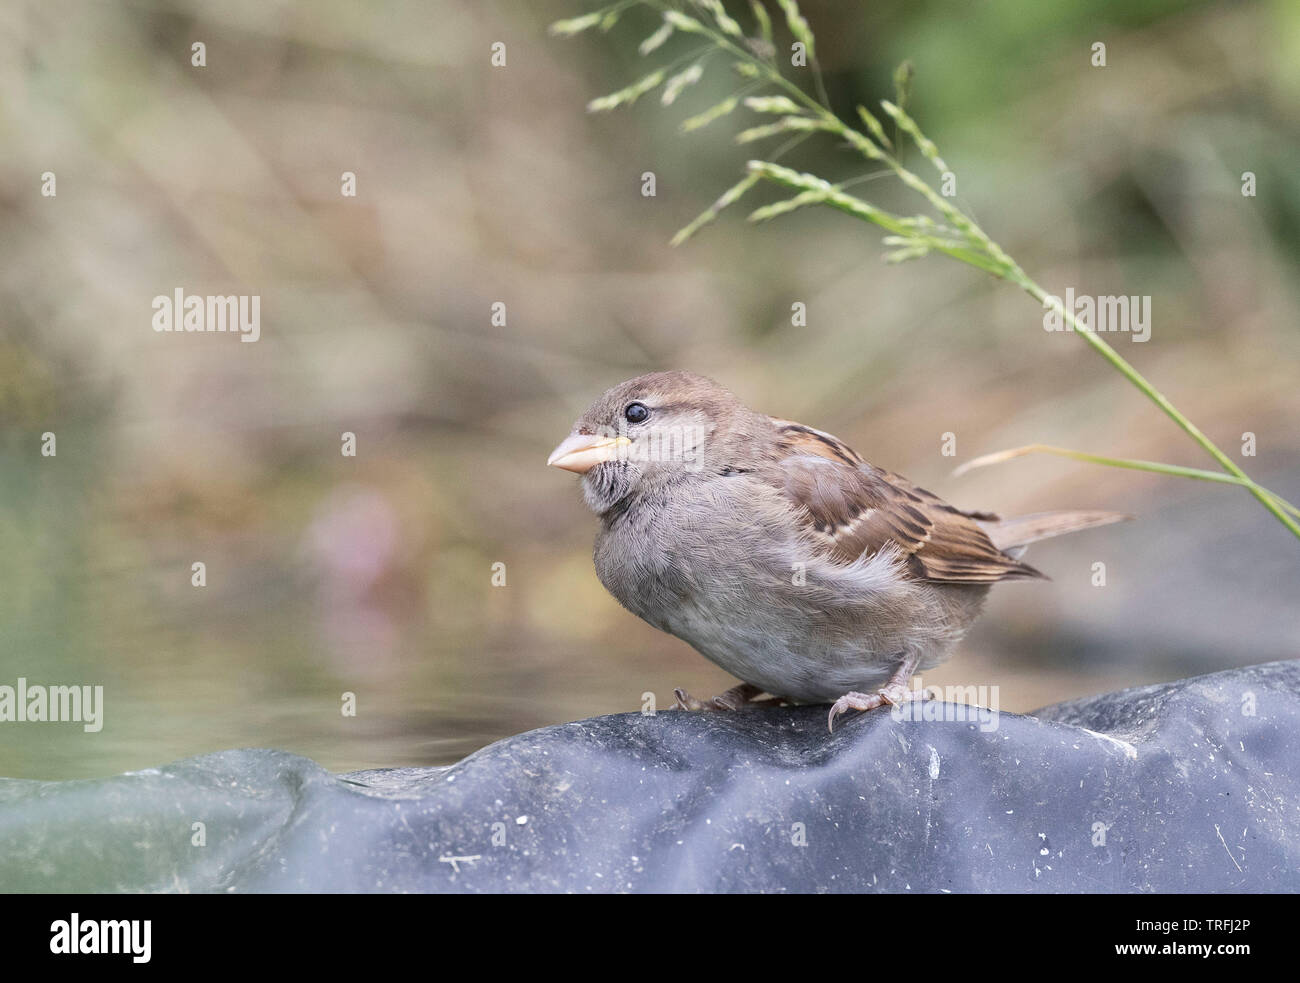 House Sparrow, Passer domesticus, at a garden water pool, Mid Wales, U.K. 2019 Stock Photo